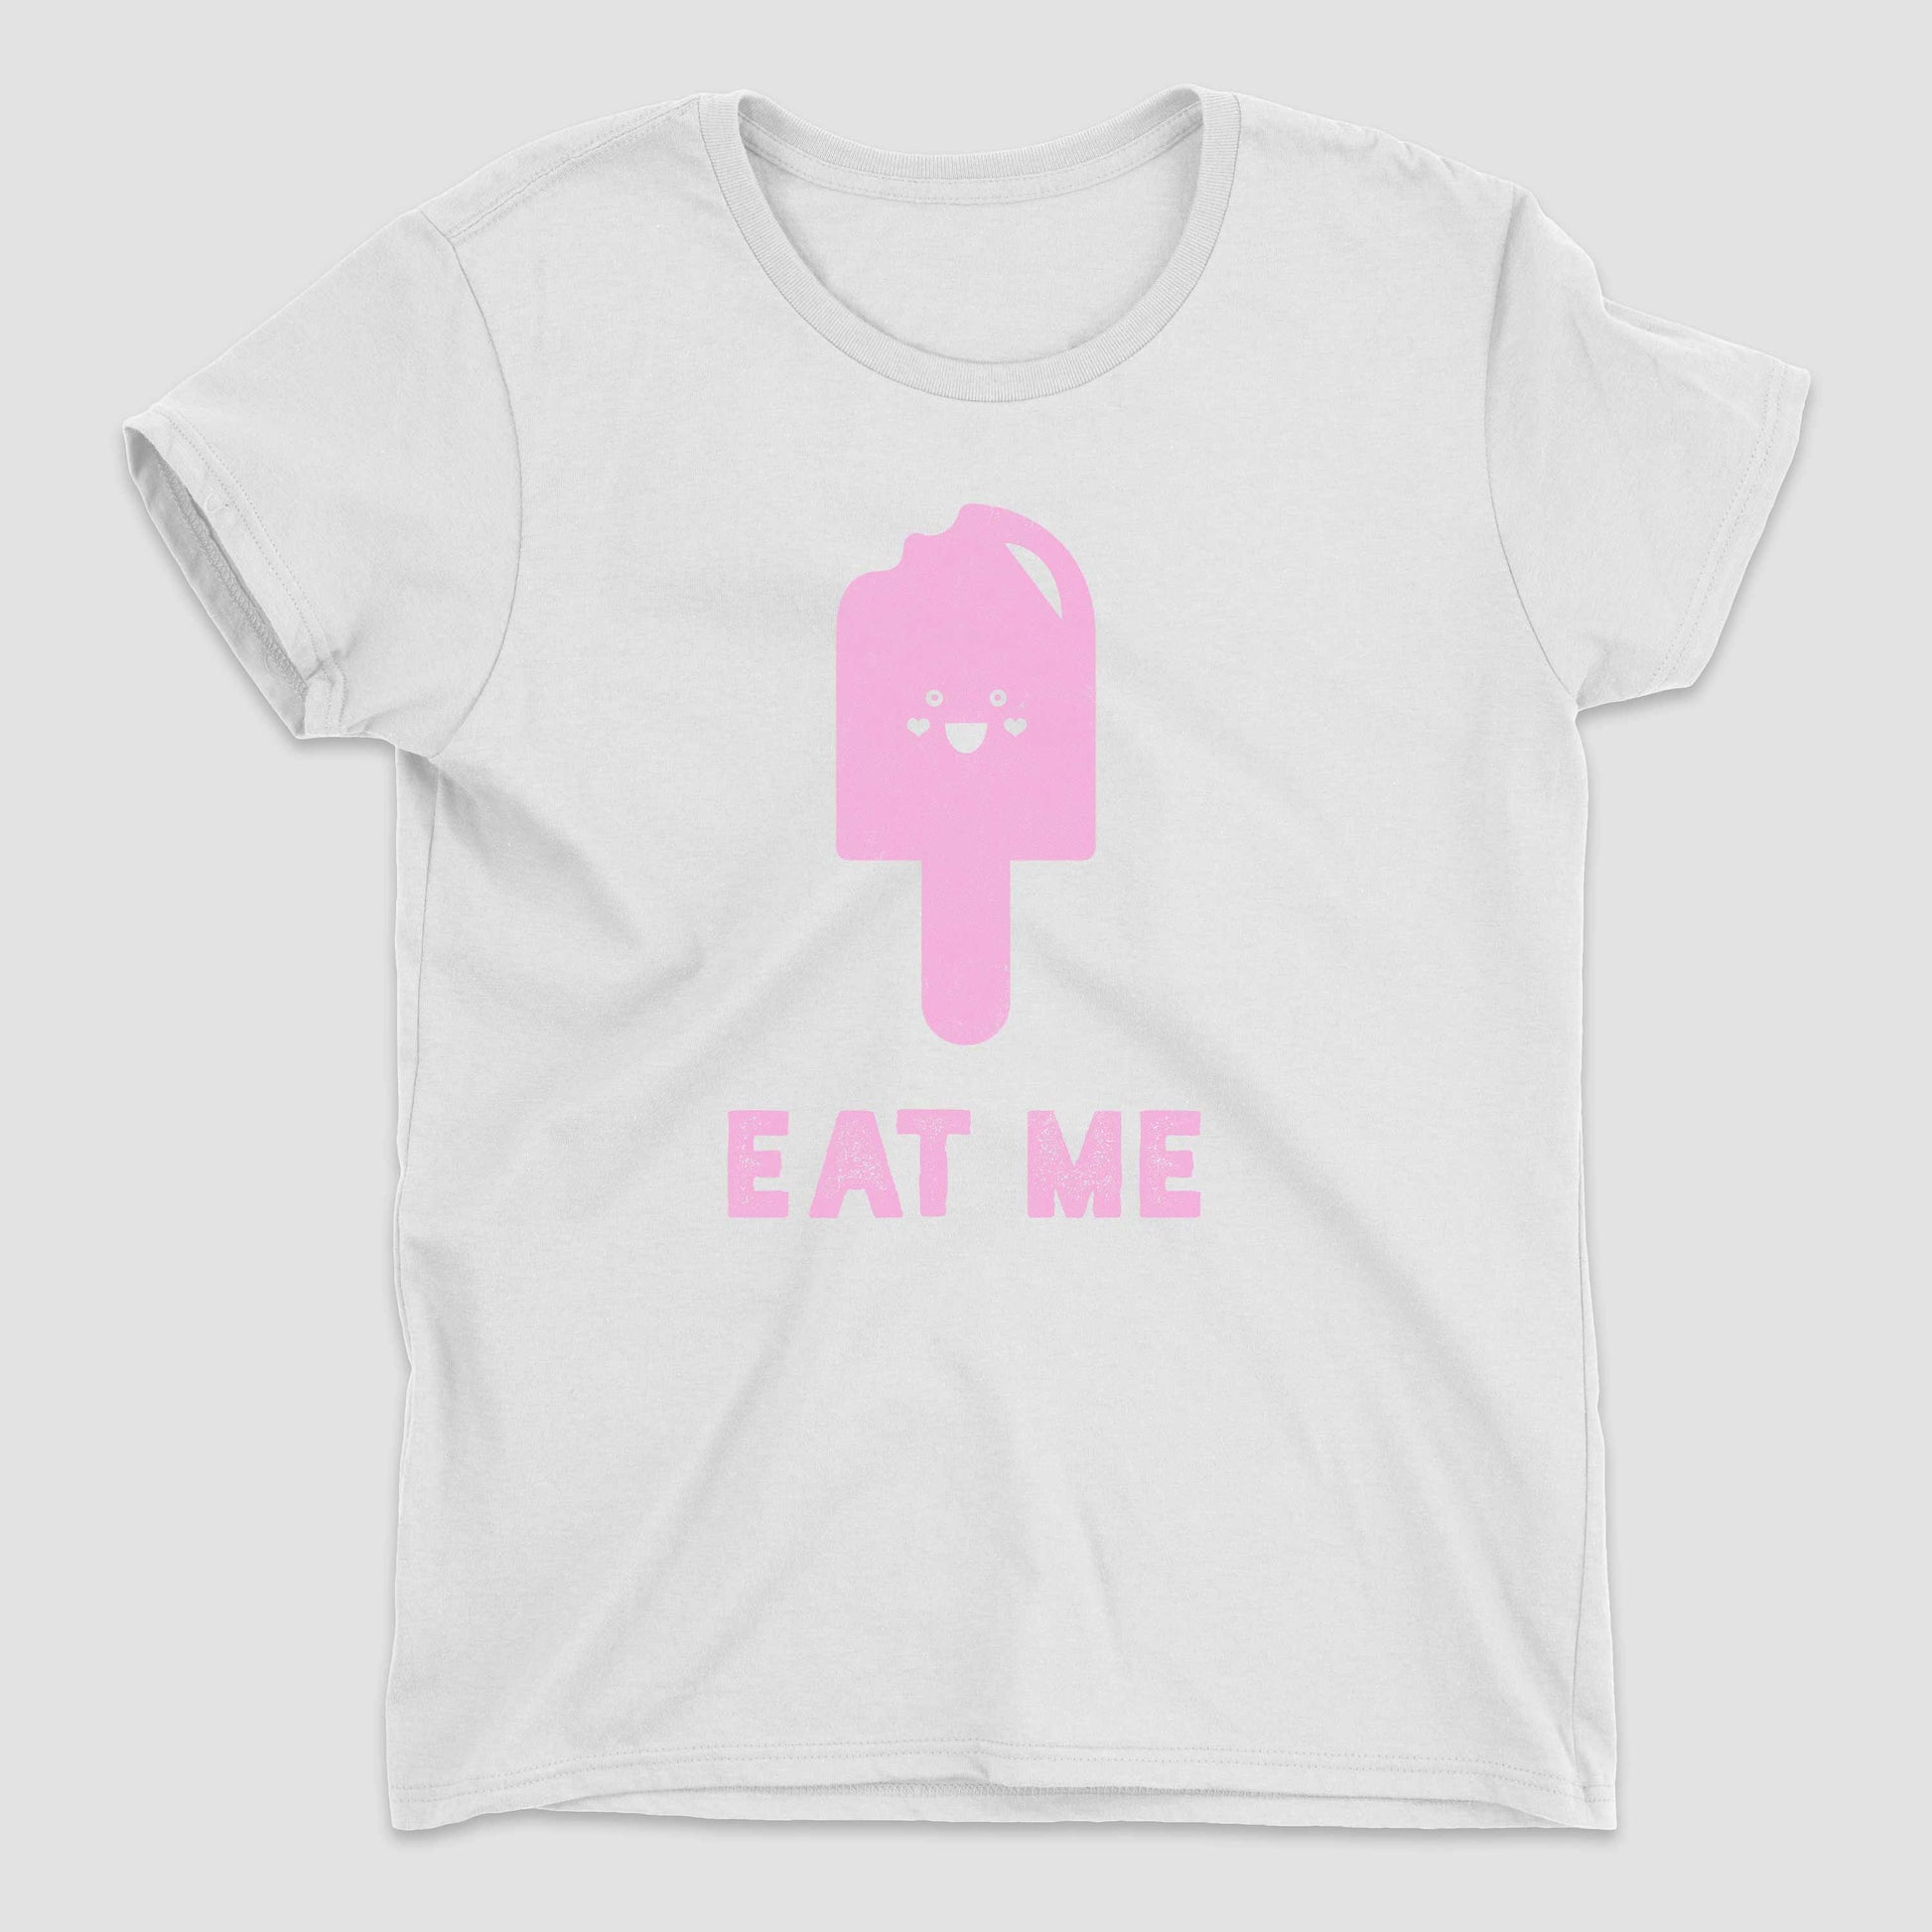 White Eat Me Women's Graphic T-Shirt by Snaxtime